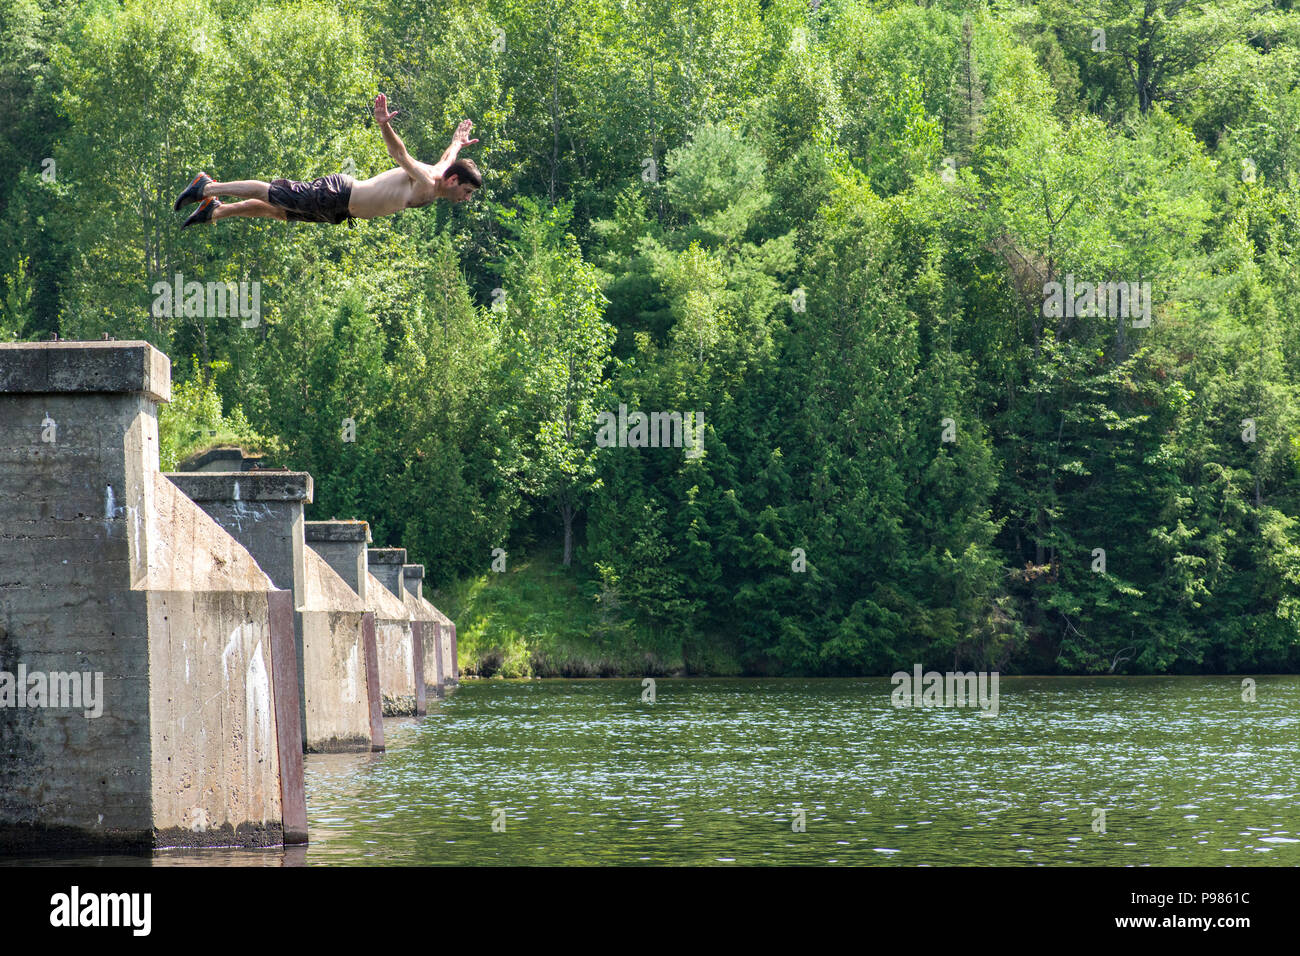 Ottawa, Canada. 15th July 2018. Summer heat: Diving into a river from an abandoned bridge to cool off and beat the heat as temperatures reach into the 30's in Ottawa, Ontario, Canada. Temperatures have been as hot as 36 C since the beginning of July, breaking heat records for the city and surrounding areas. Stock Photo